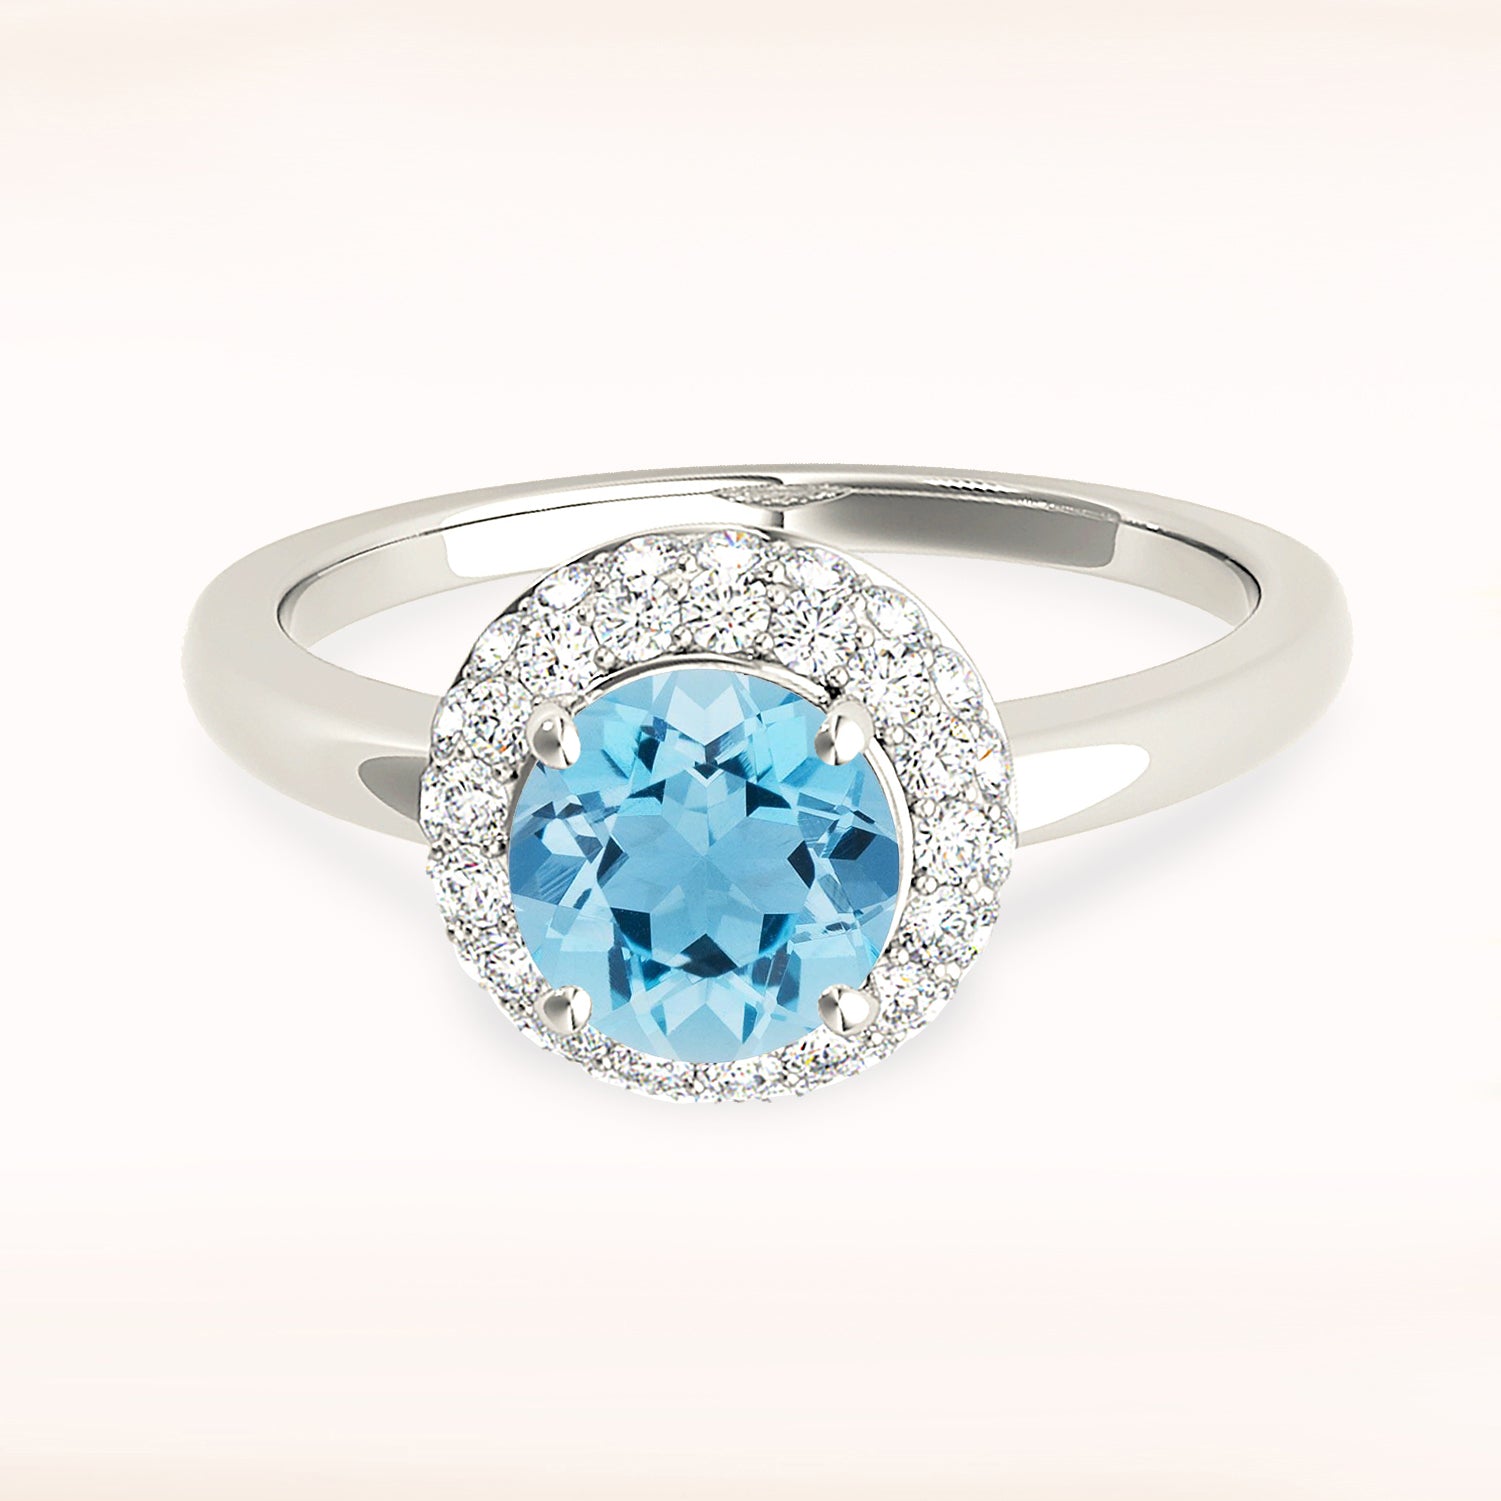 1.10 ct. Genuine Aquamarine Ring With 0.40 ctw. Diamond Double Edge Halo and Solid Gold Rounded Band | Round Blue Aquamarine Halo Ring-in 14K/18K White, Yellow, Rose Gold and Platinum - Christmas Jewelry Gift -VIRABYANI